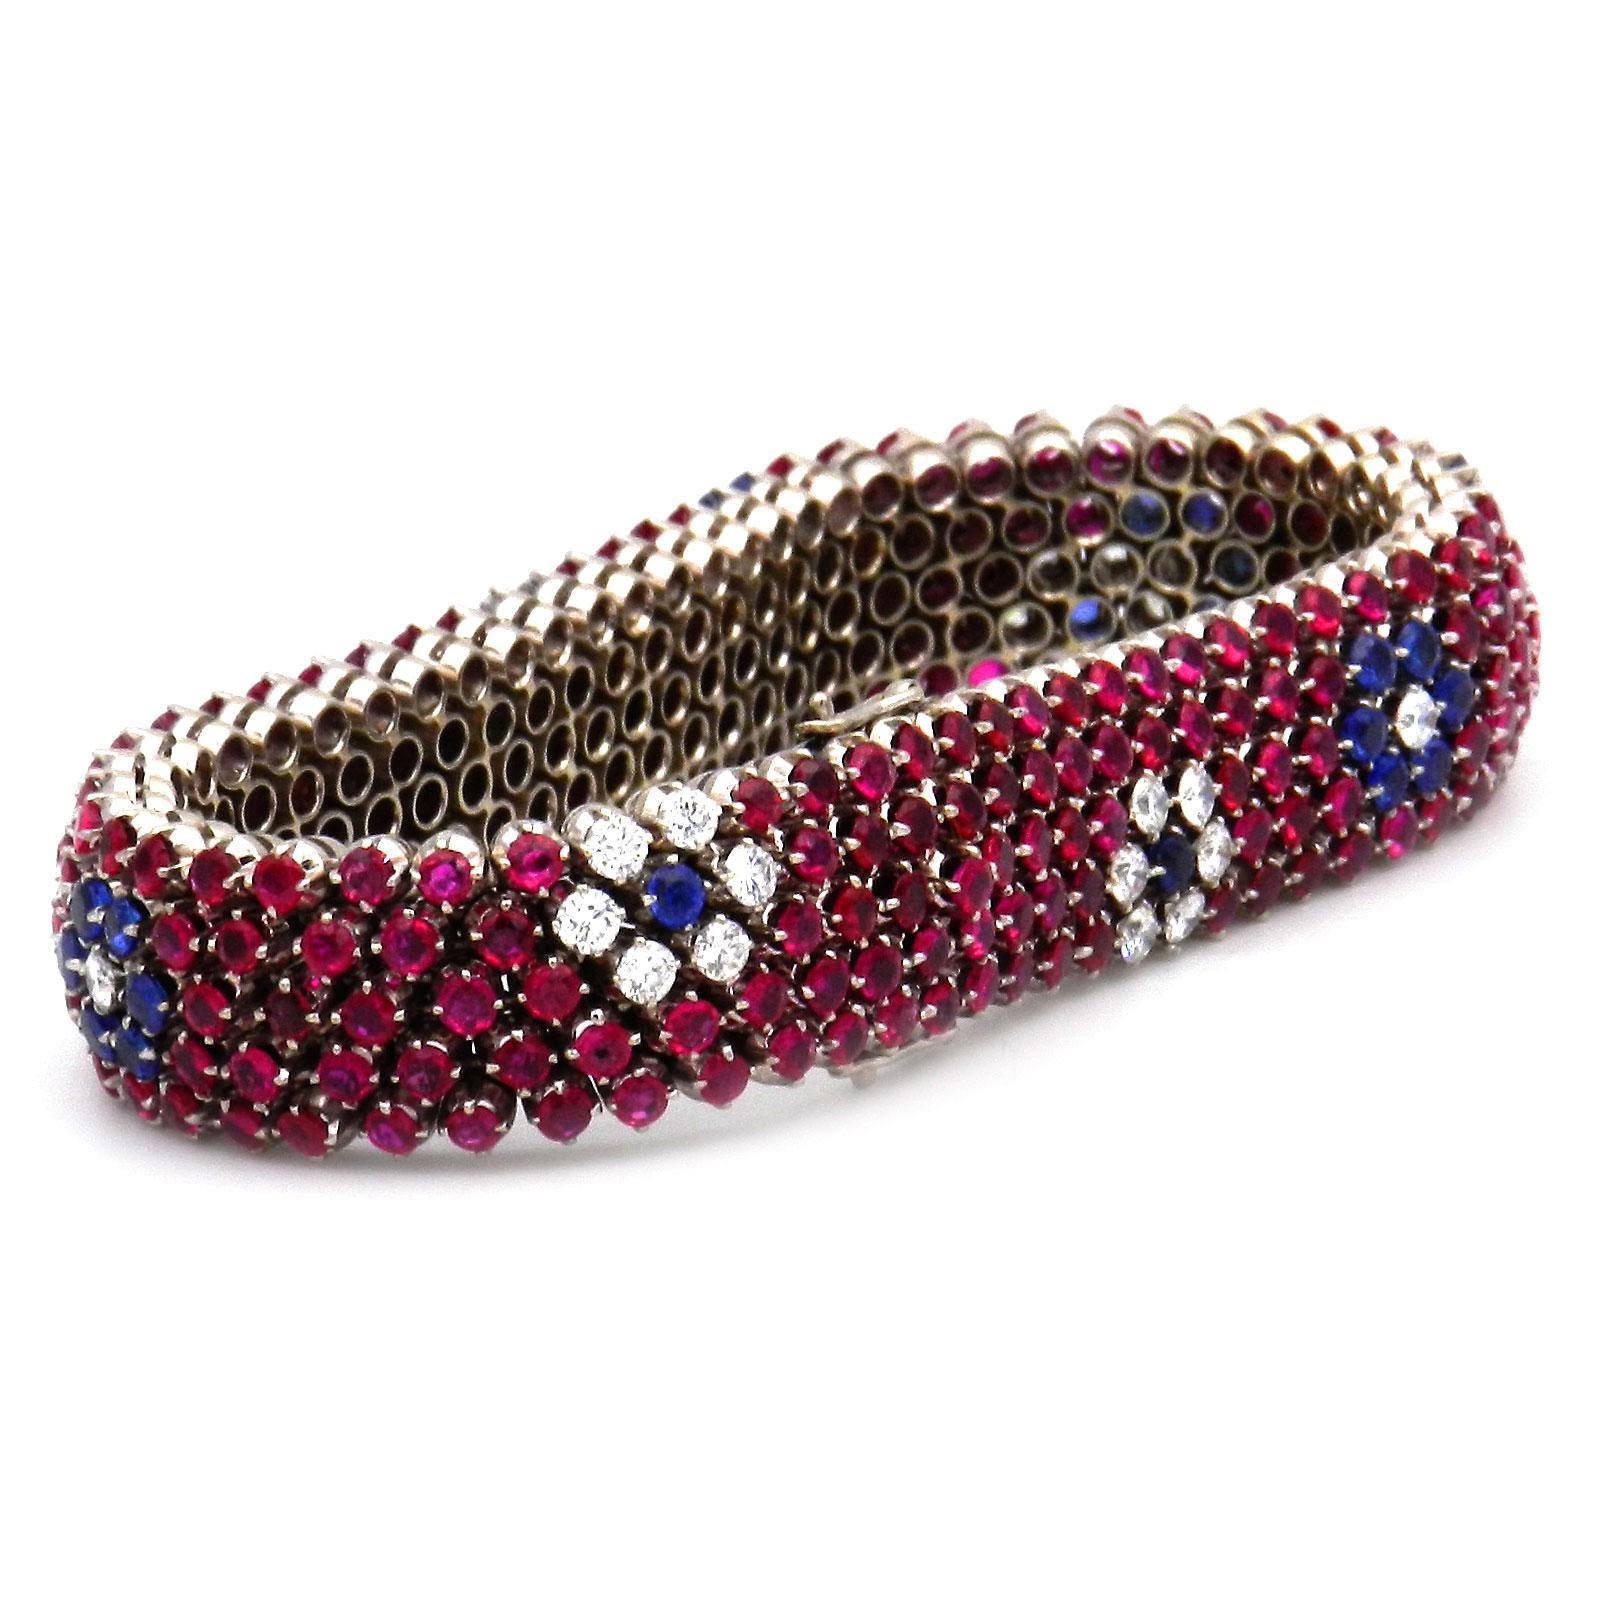 14 Carat Ruby Sapphire and Diamond Bracelet in 18K White Gold In Good Condition For Sale In Goettingen, DE